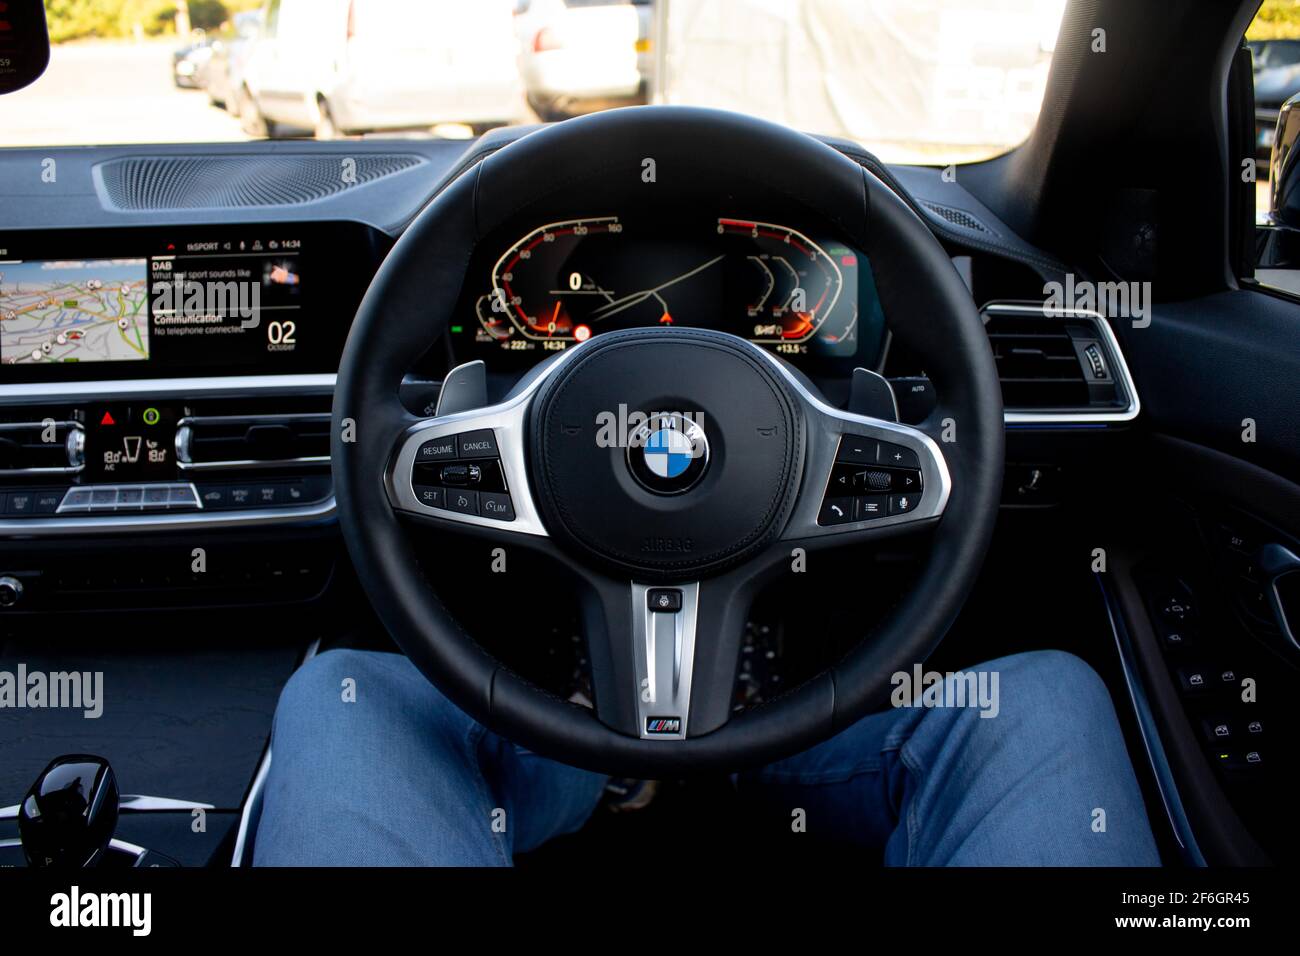 A 2019 BMW 3 Series G20 With Black Leather Multi Function Heated Steering Wheel With Aluminum Inserts Stock Photo